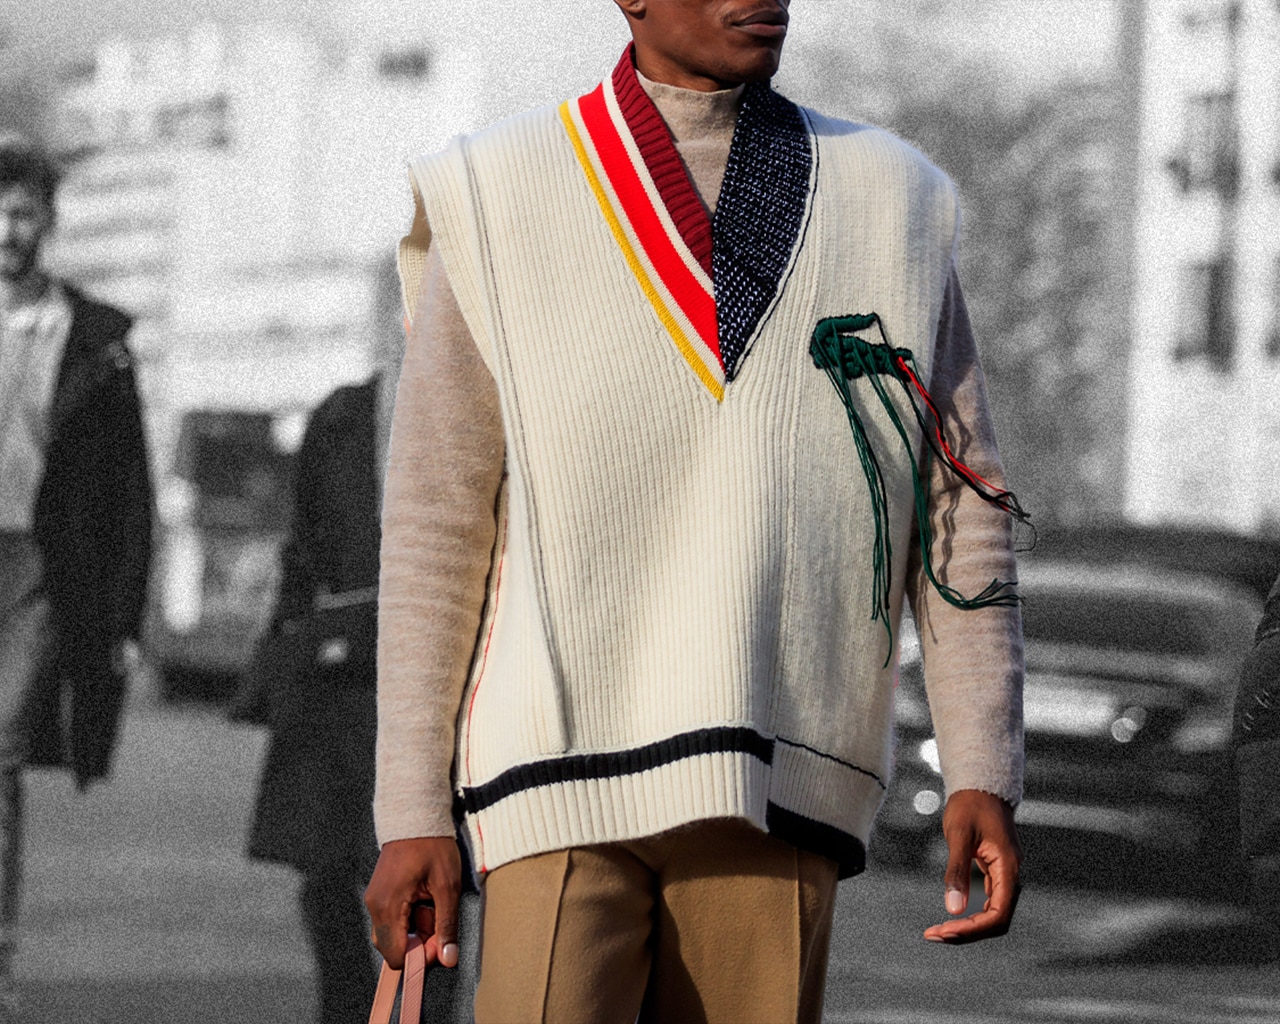 Fashion: The Stylish Gent's Guide To Sweater Vests | The Journal | MR PORTER